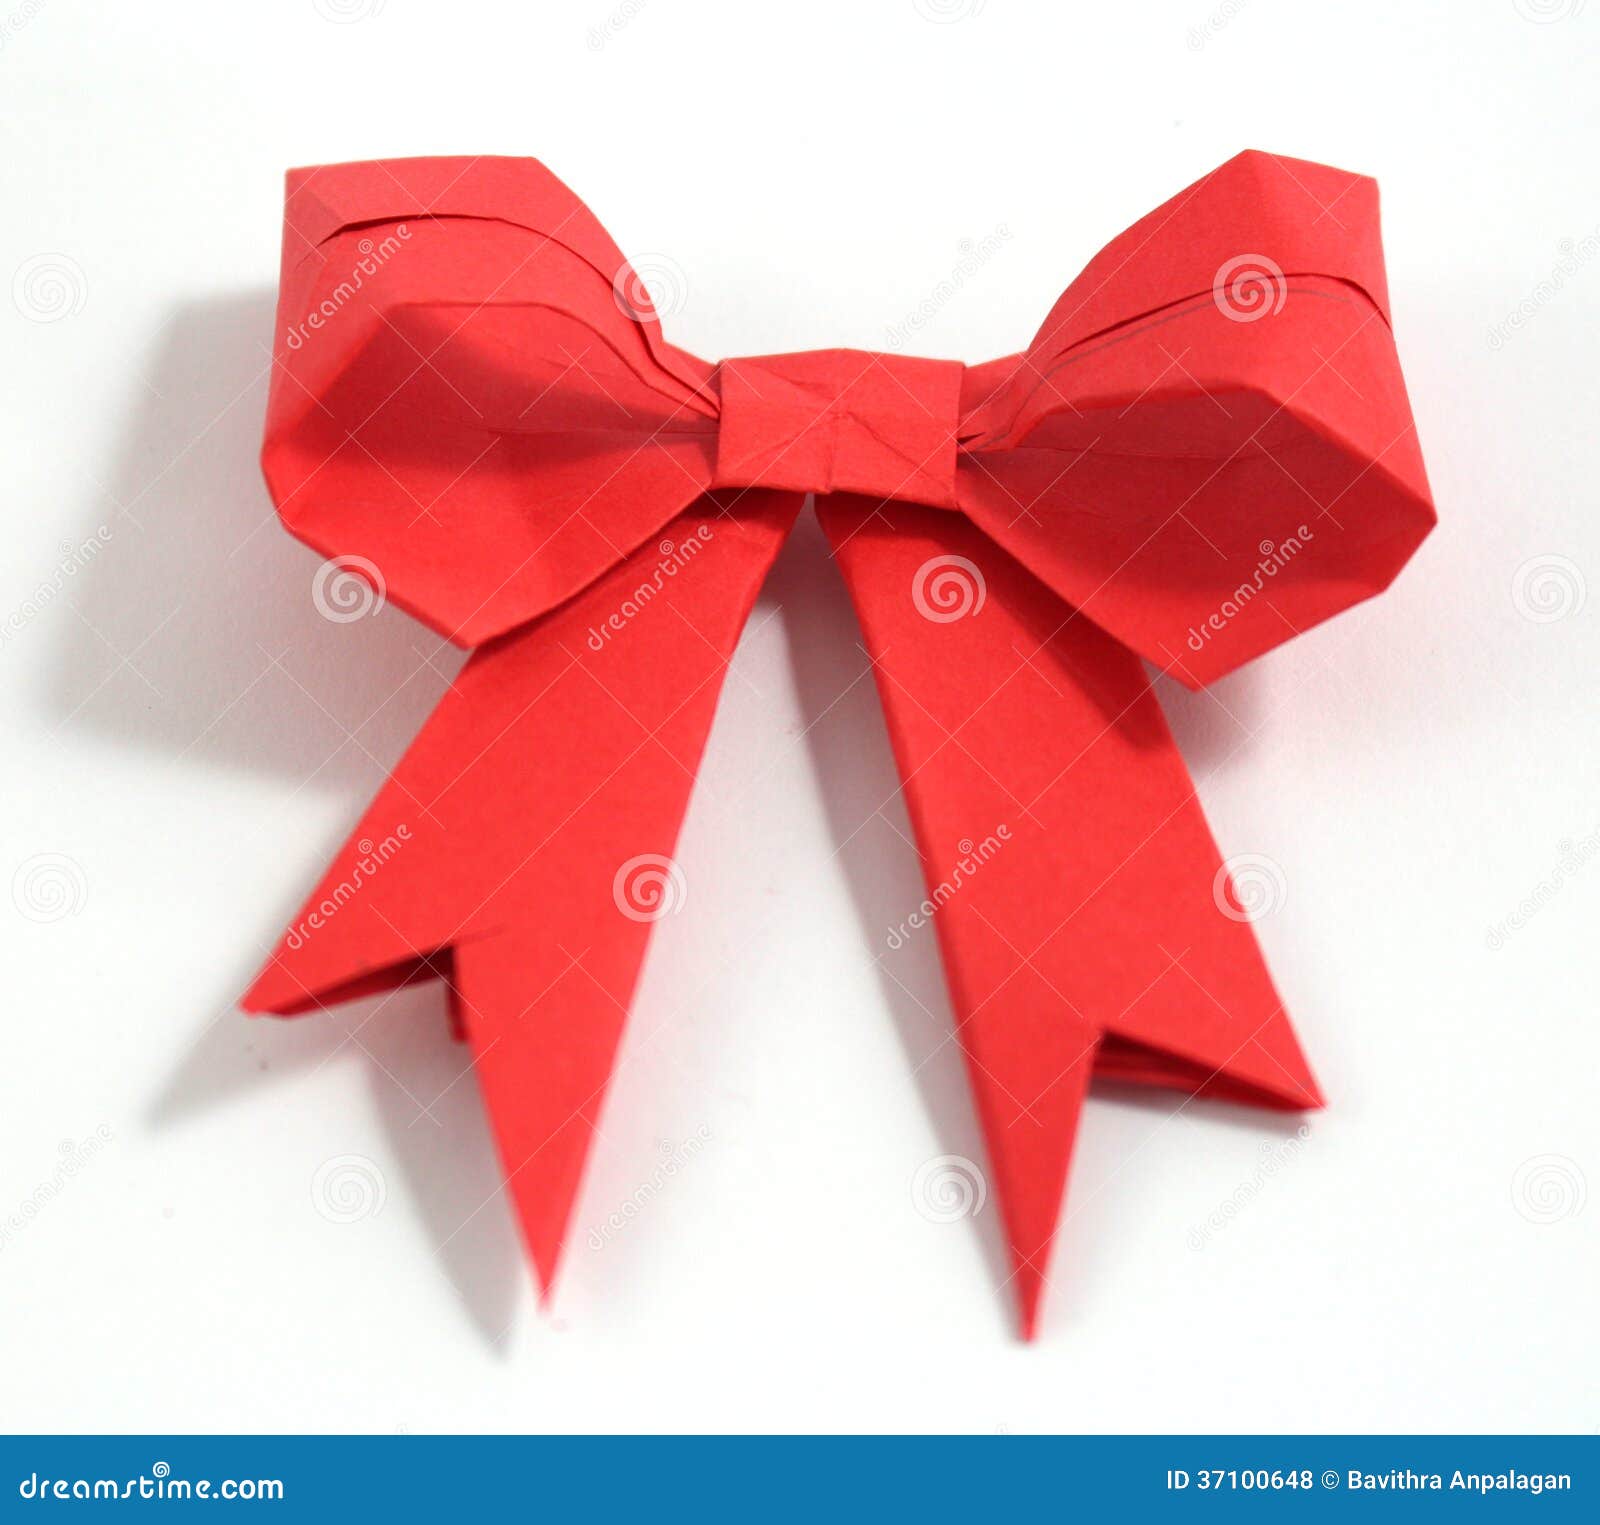 Origami bow photo. Image of bright - 37100648